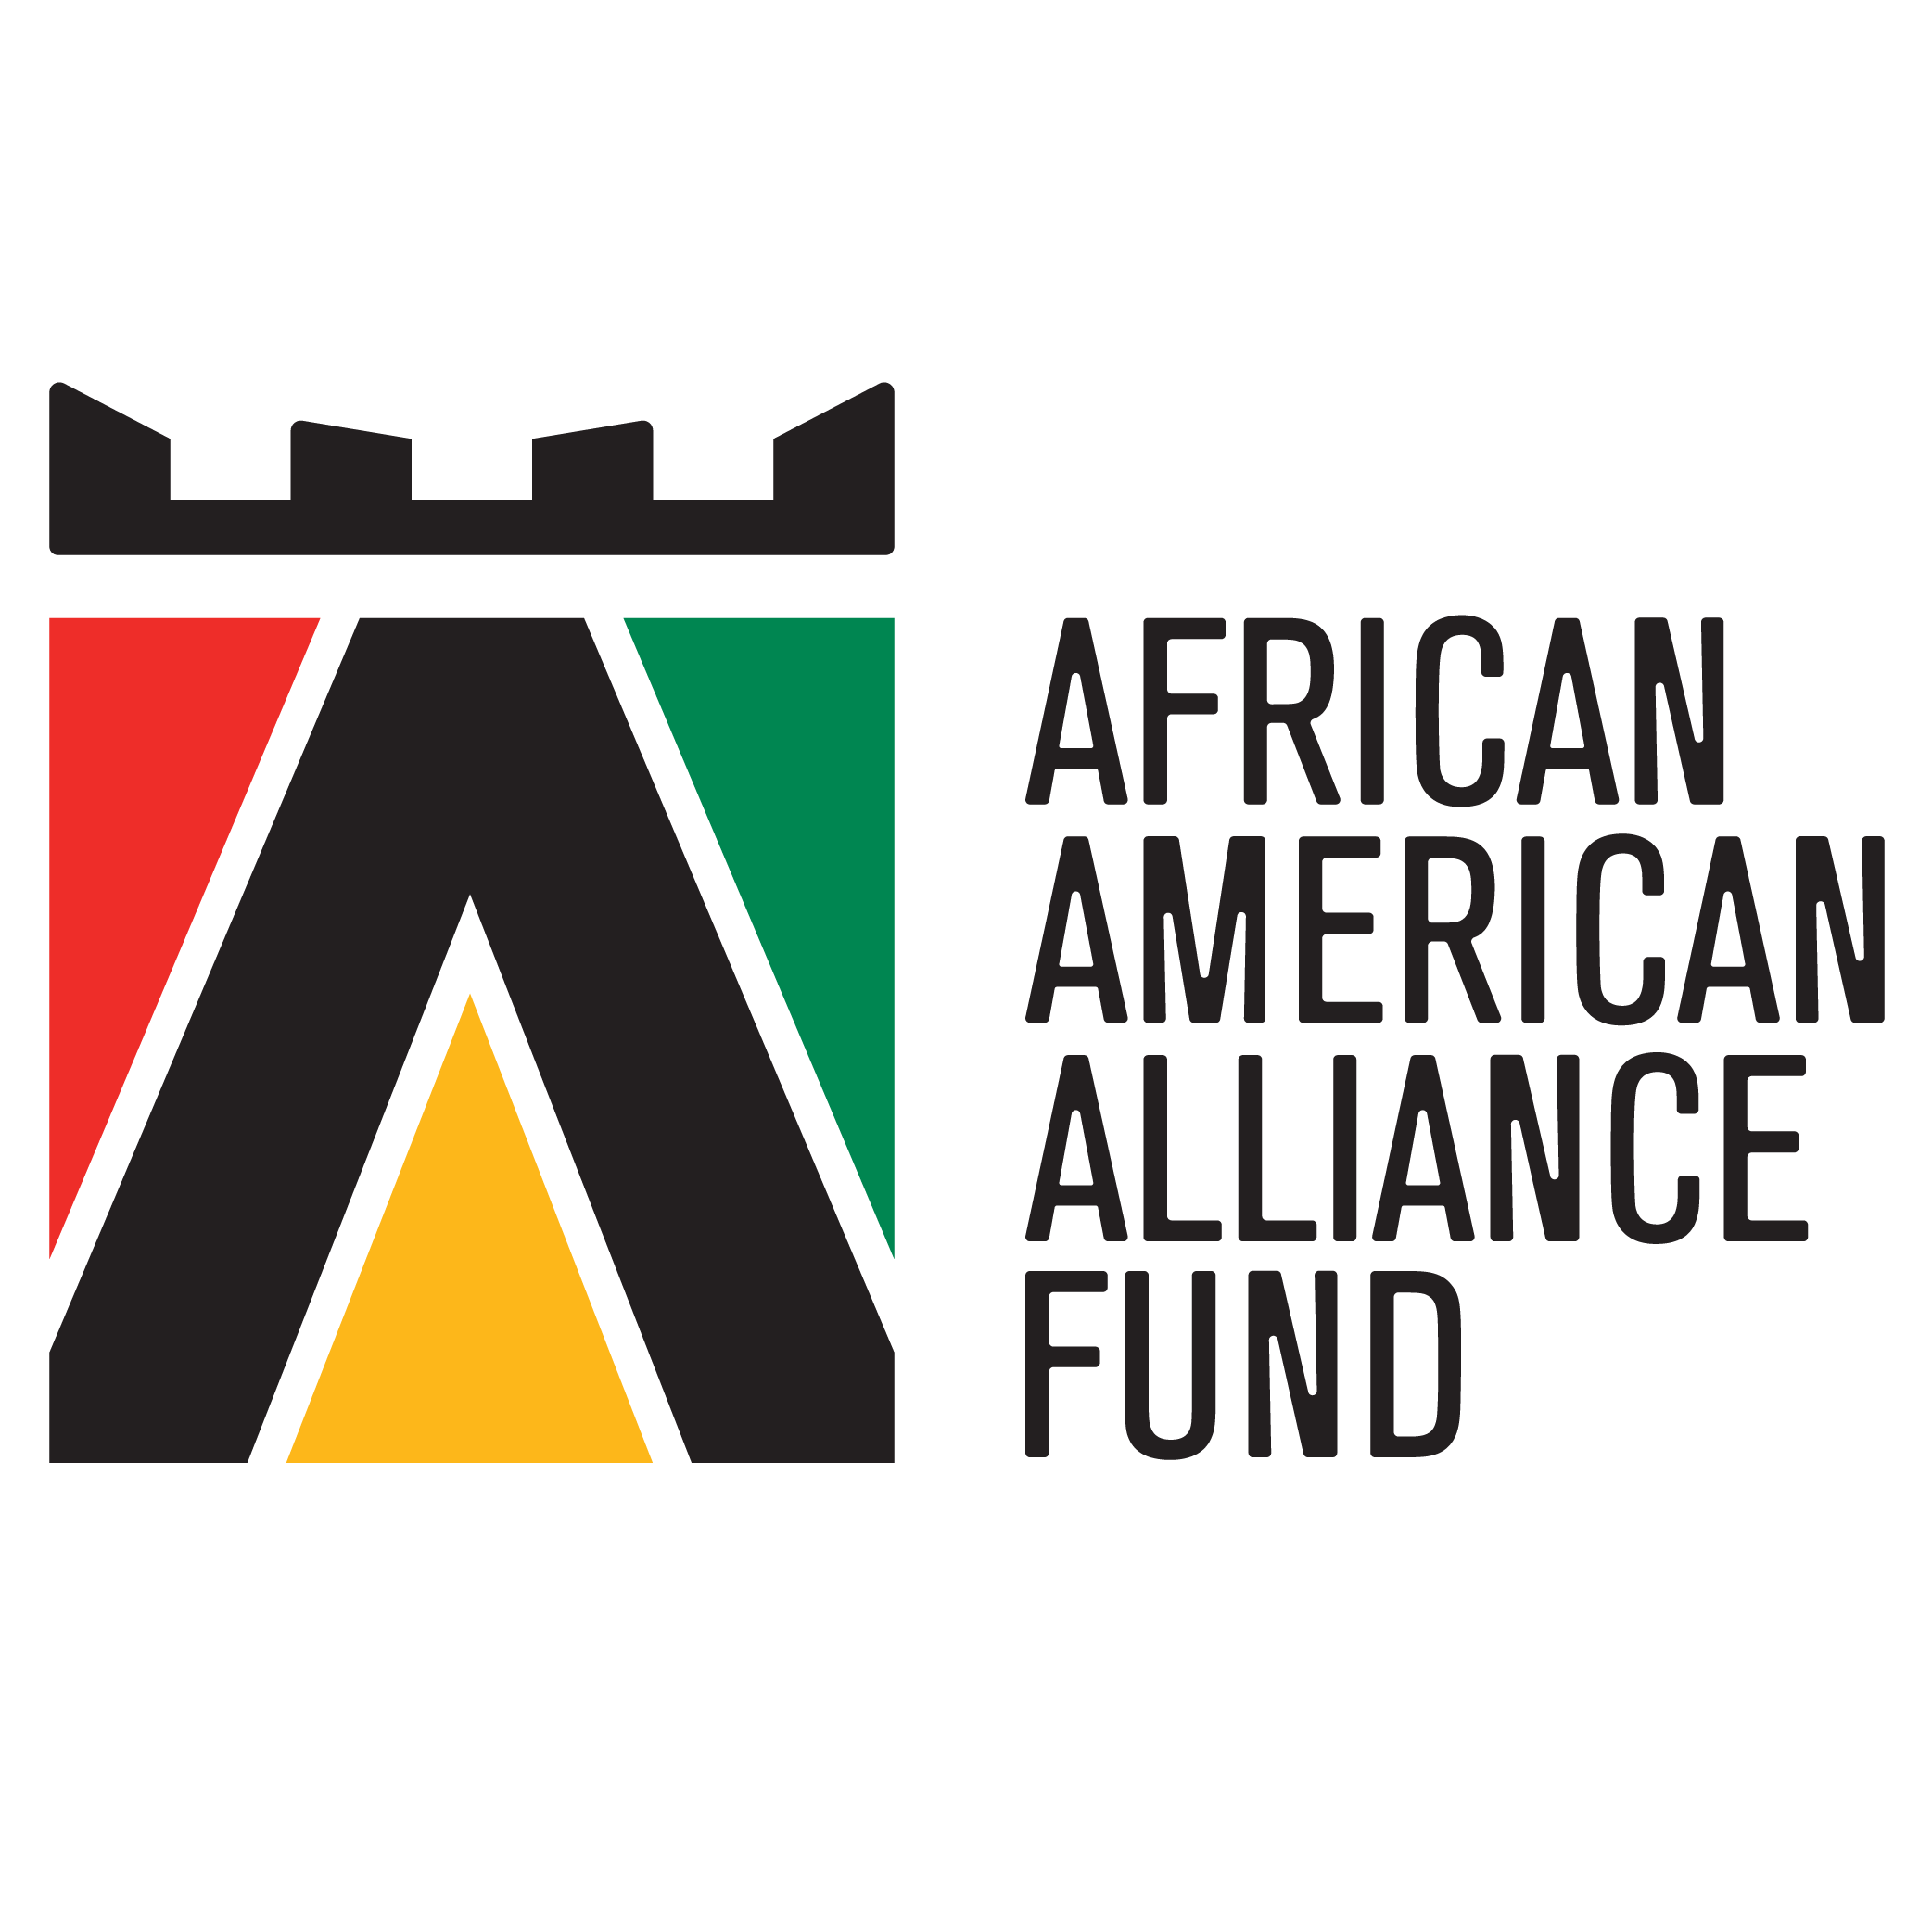 Orange County Community Foundation Announces New Round of Grants Totaling $120,000 from African American Alliance Fund